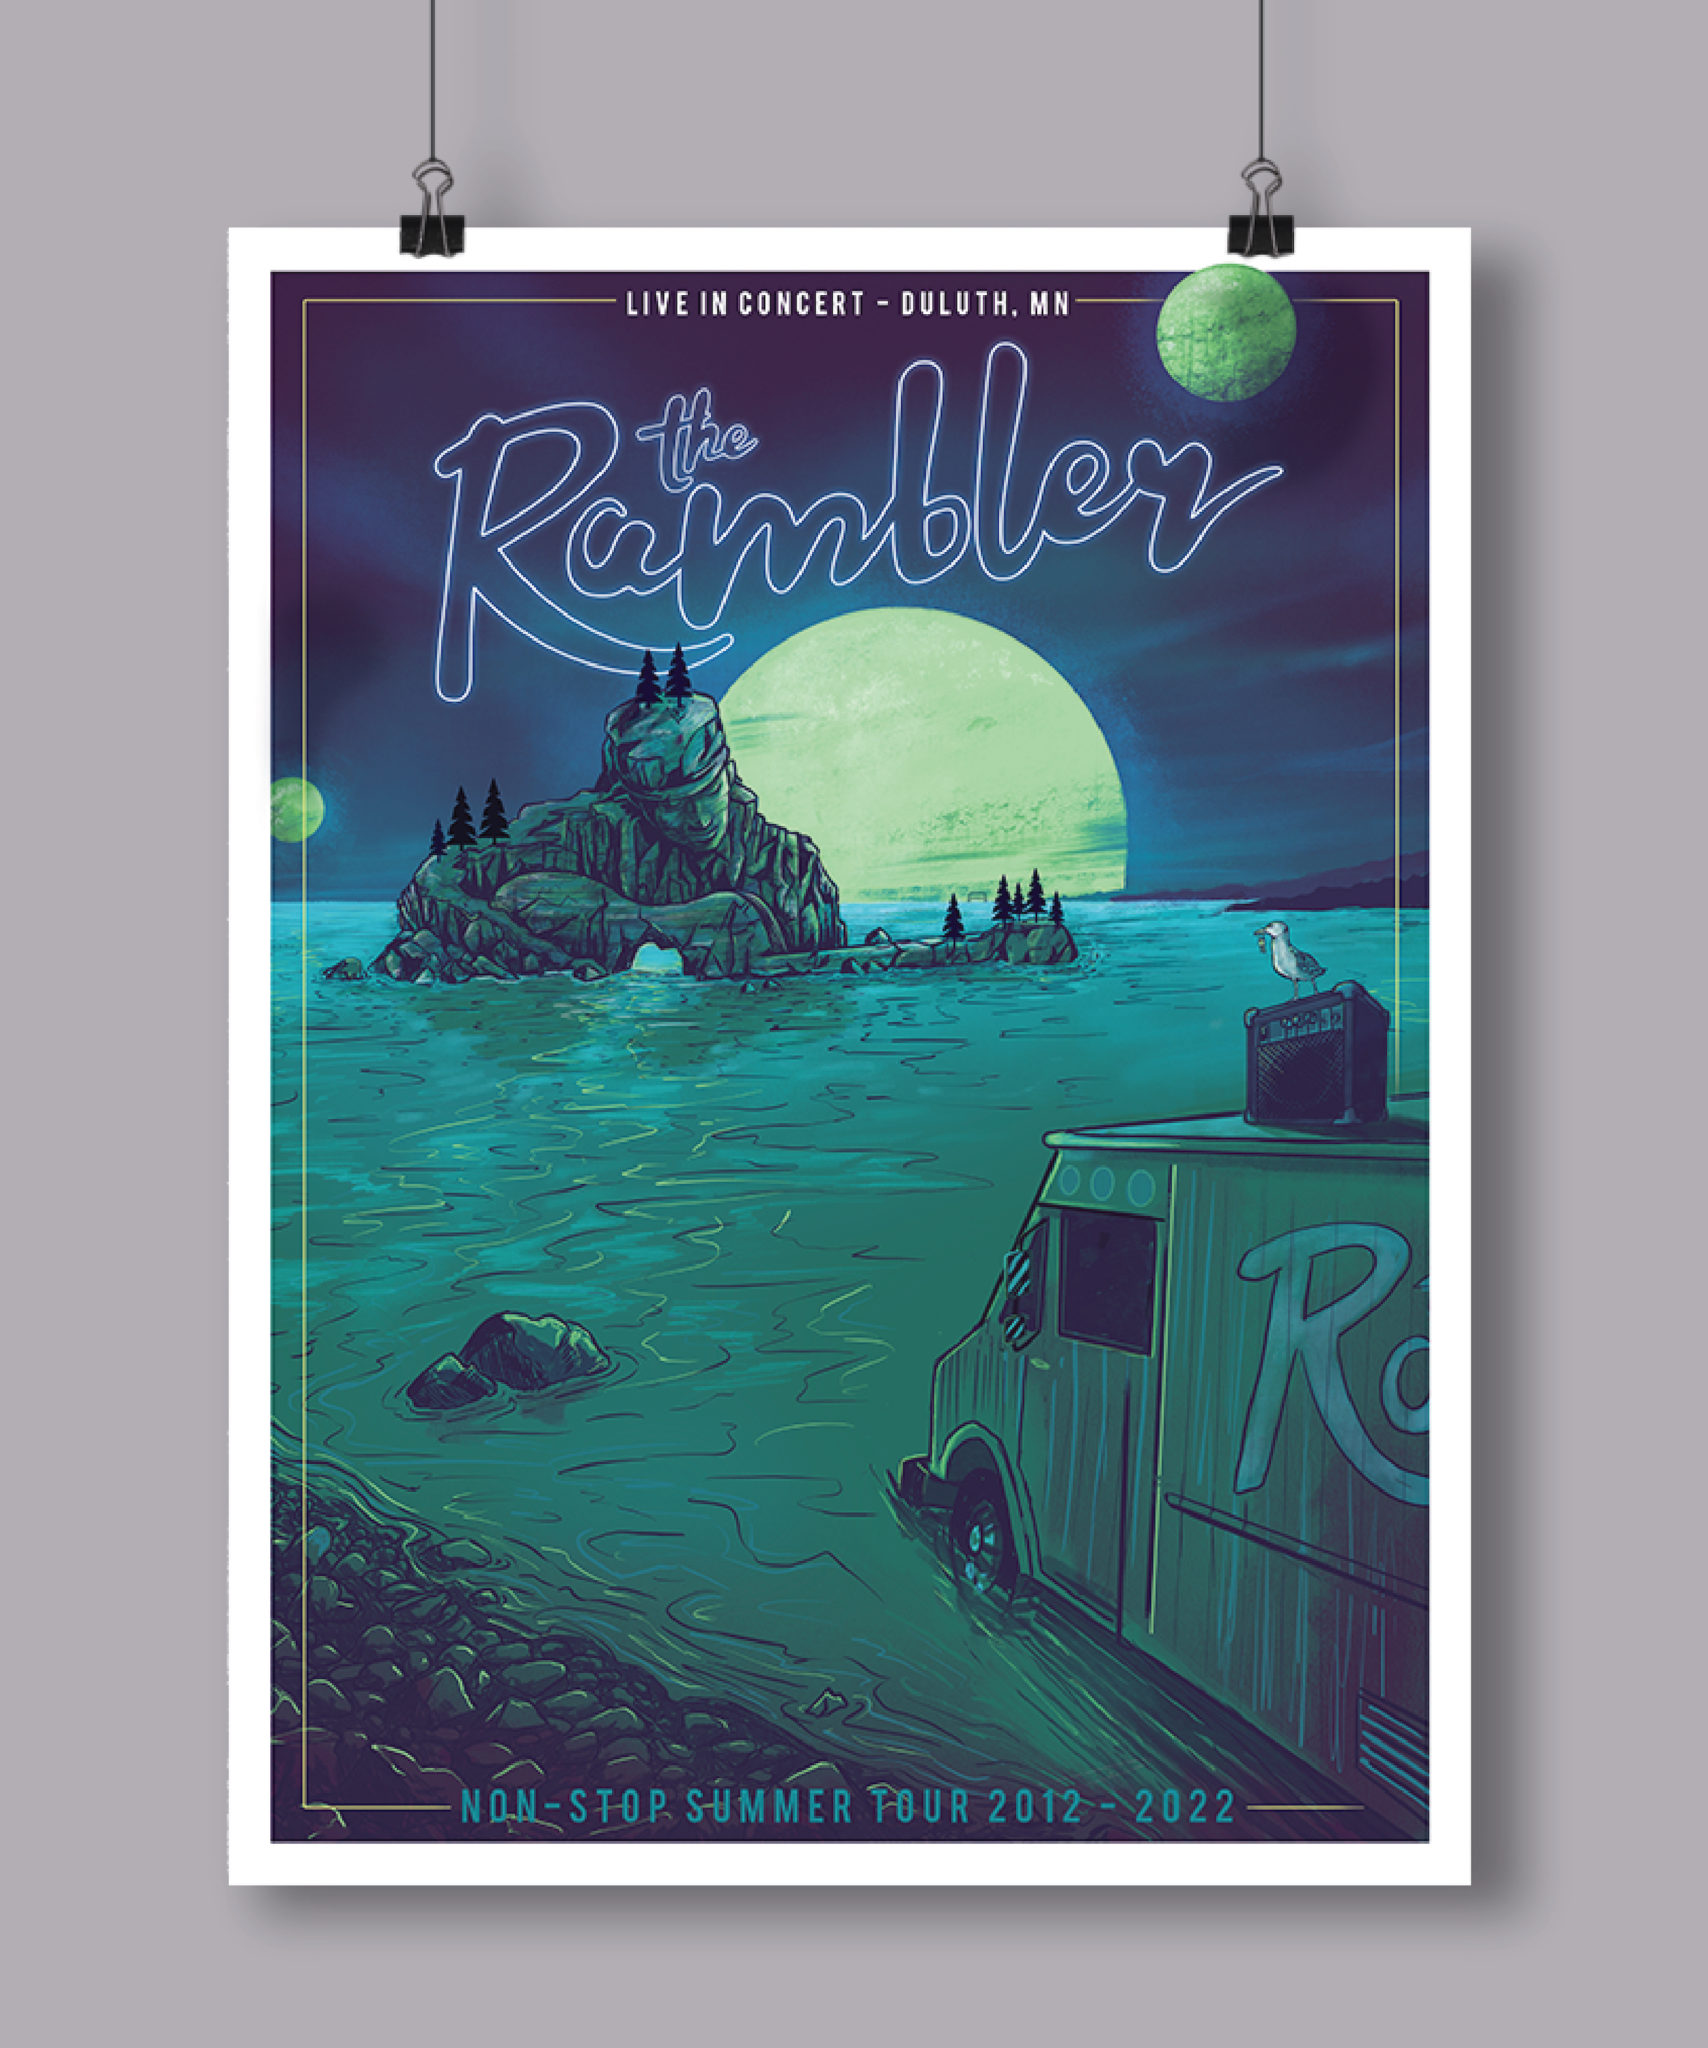 The Rambler food truck promotional poster, created by Šek Design Studio